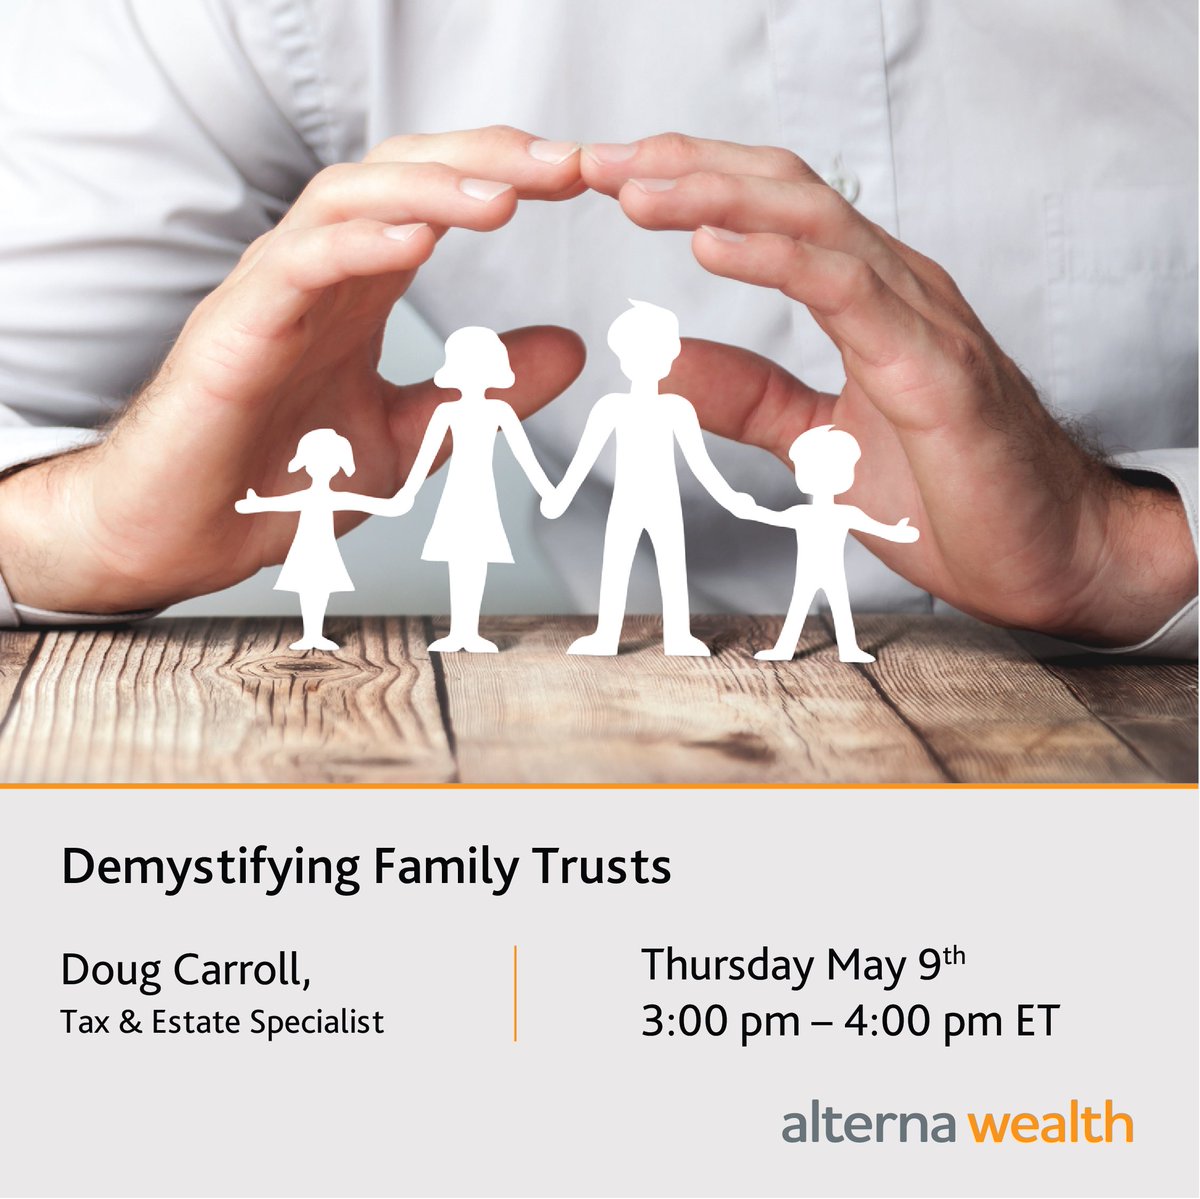 Have you ever wondered about the role of trusts in #estateplanning? 🤔 Join our webinar 'Demystifying Family Trusts' on May 9, 3-4 PM ET. Peel away the complexities! Register here: bit.ly/Demystifying-F… 

#FamilyTrusts